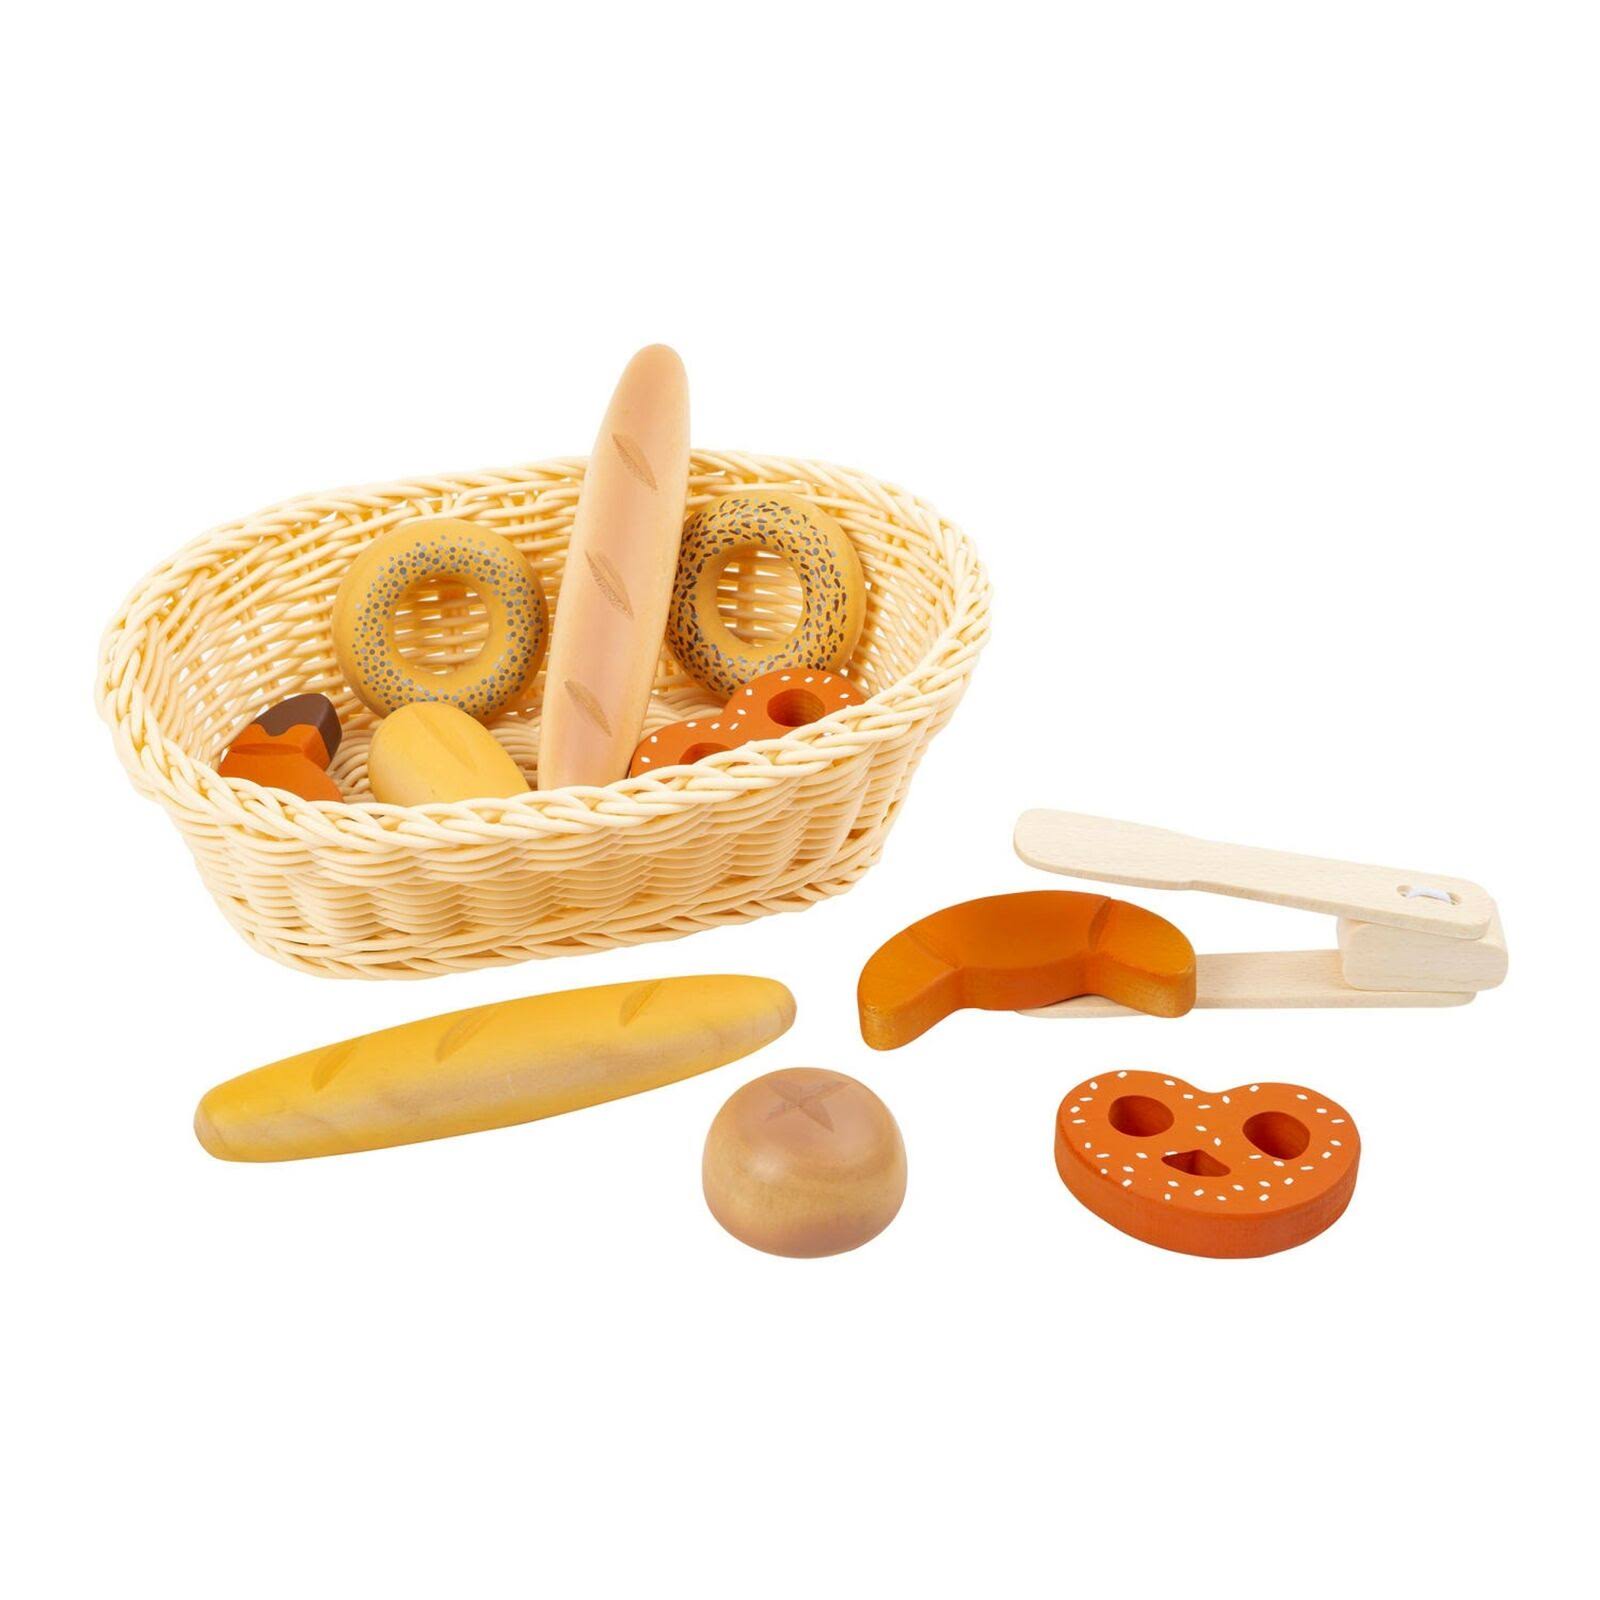 Small Foot Wooden Toys - Children's 12 Piece Bread Basket Playset